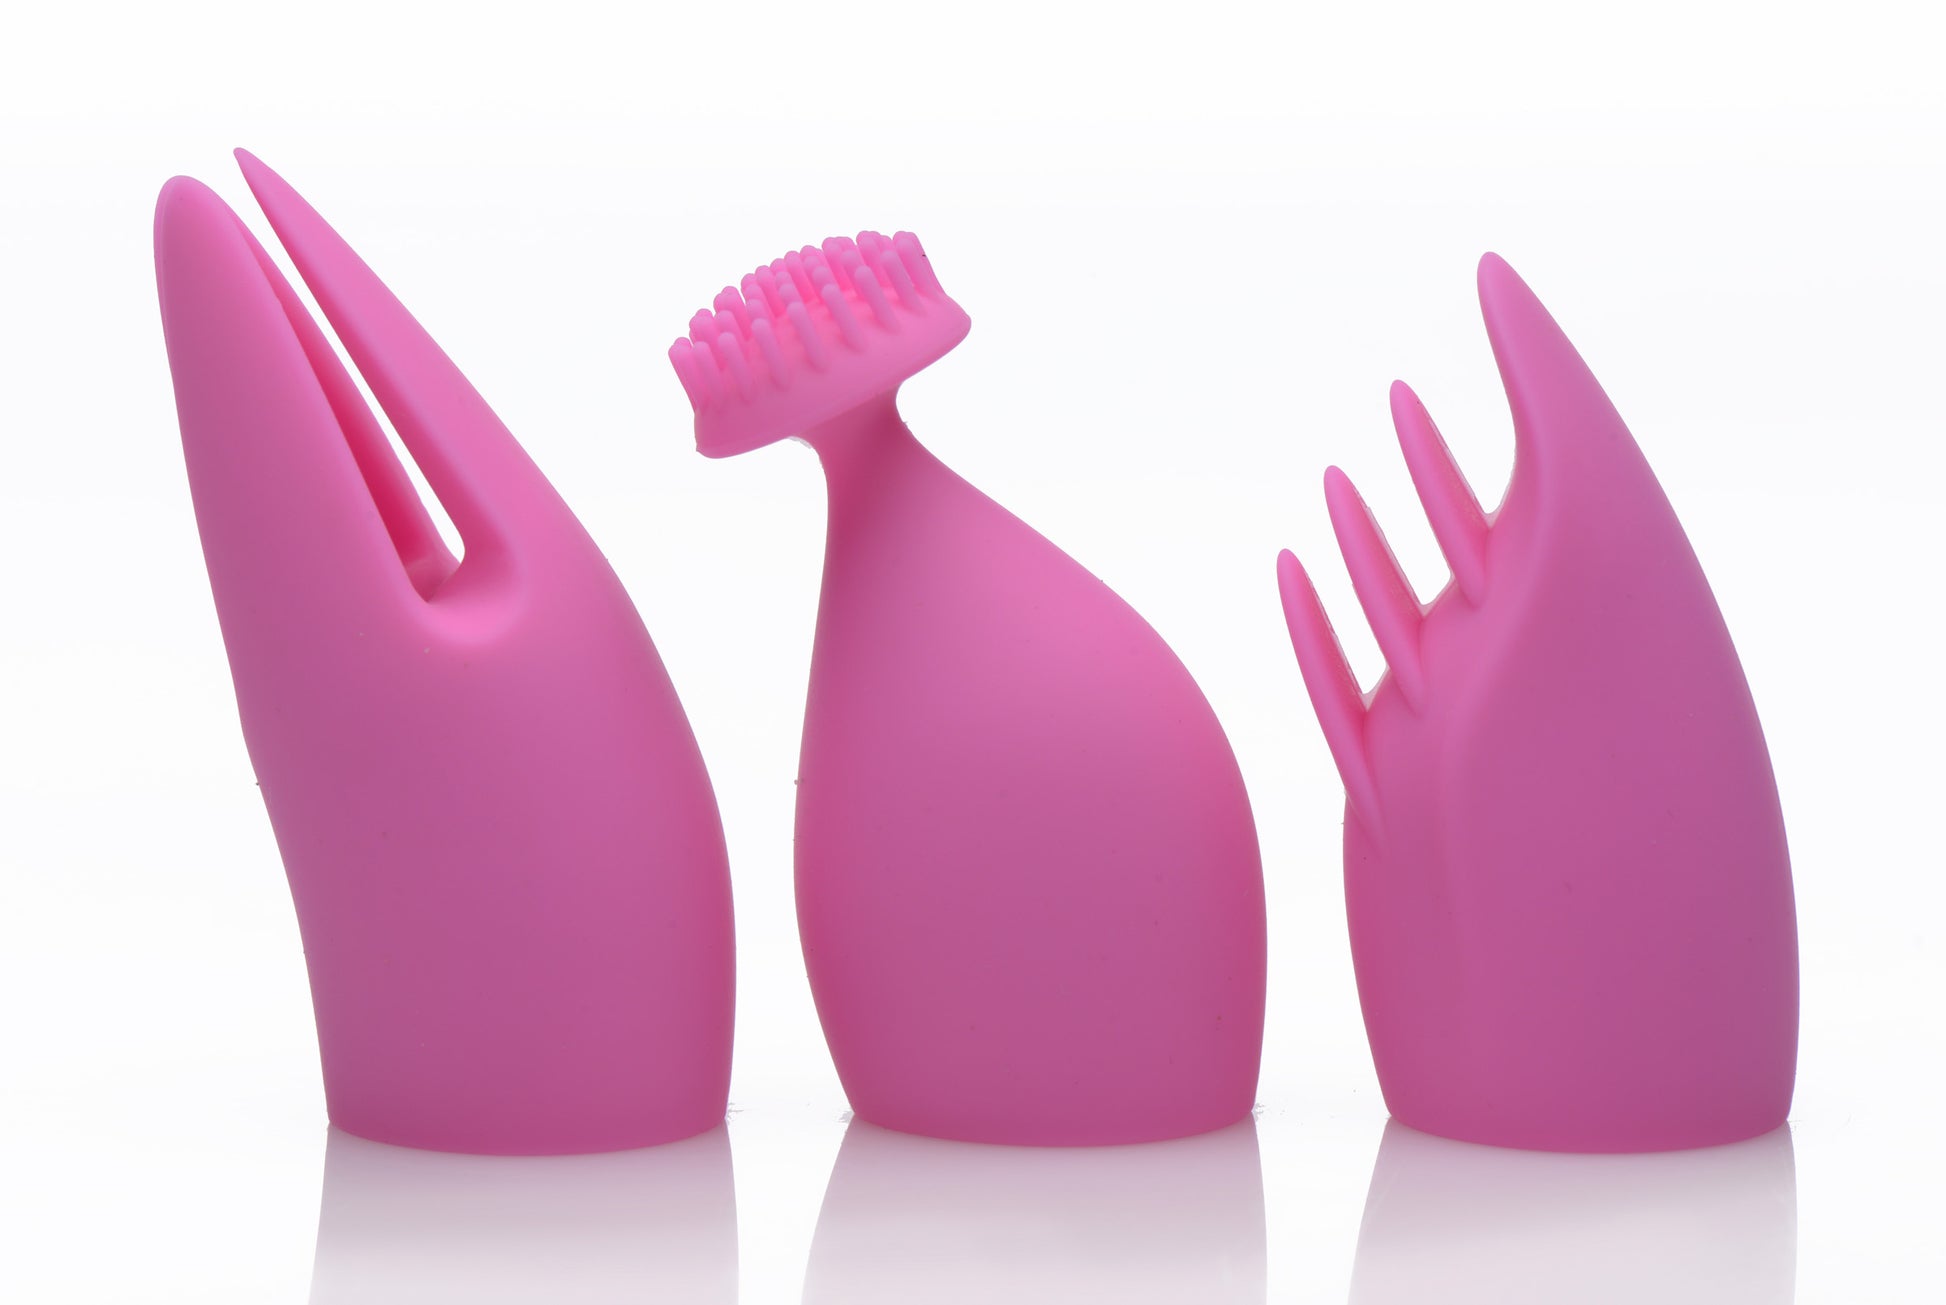 10X Versa-Thrust Vibrating and Thrusting Silicone Rabbit with 3 Attachments - UABDSM